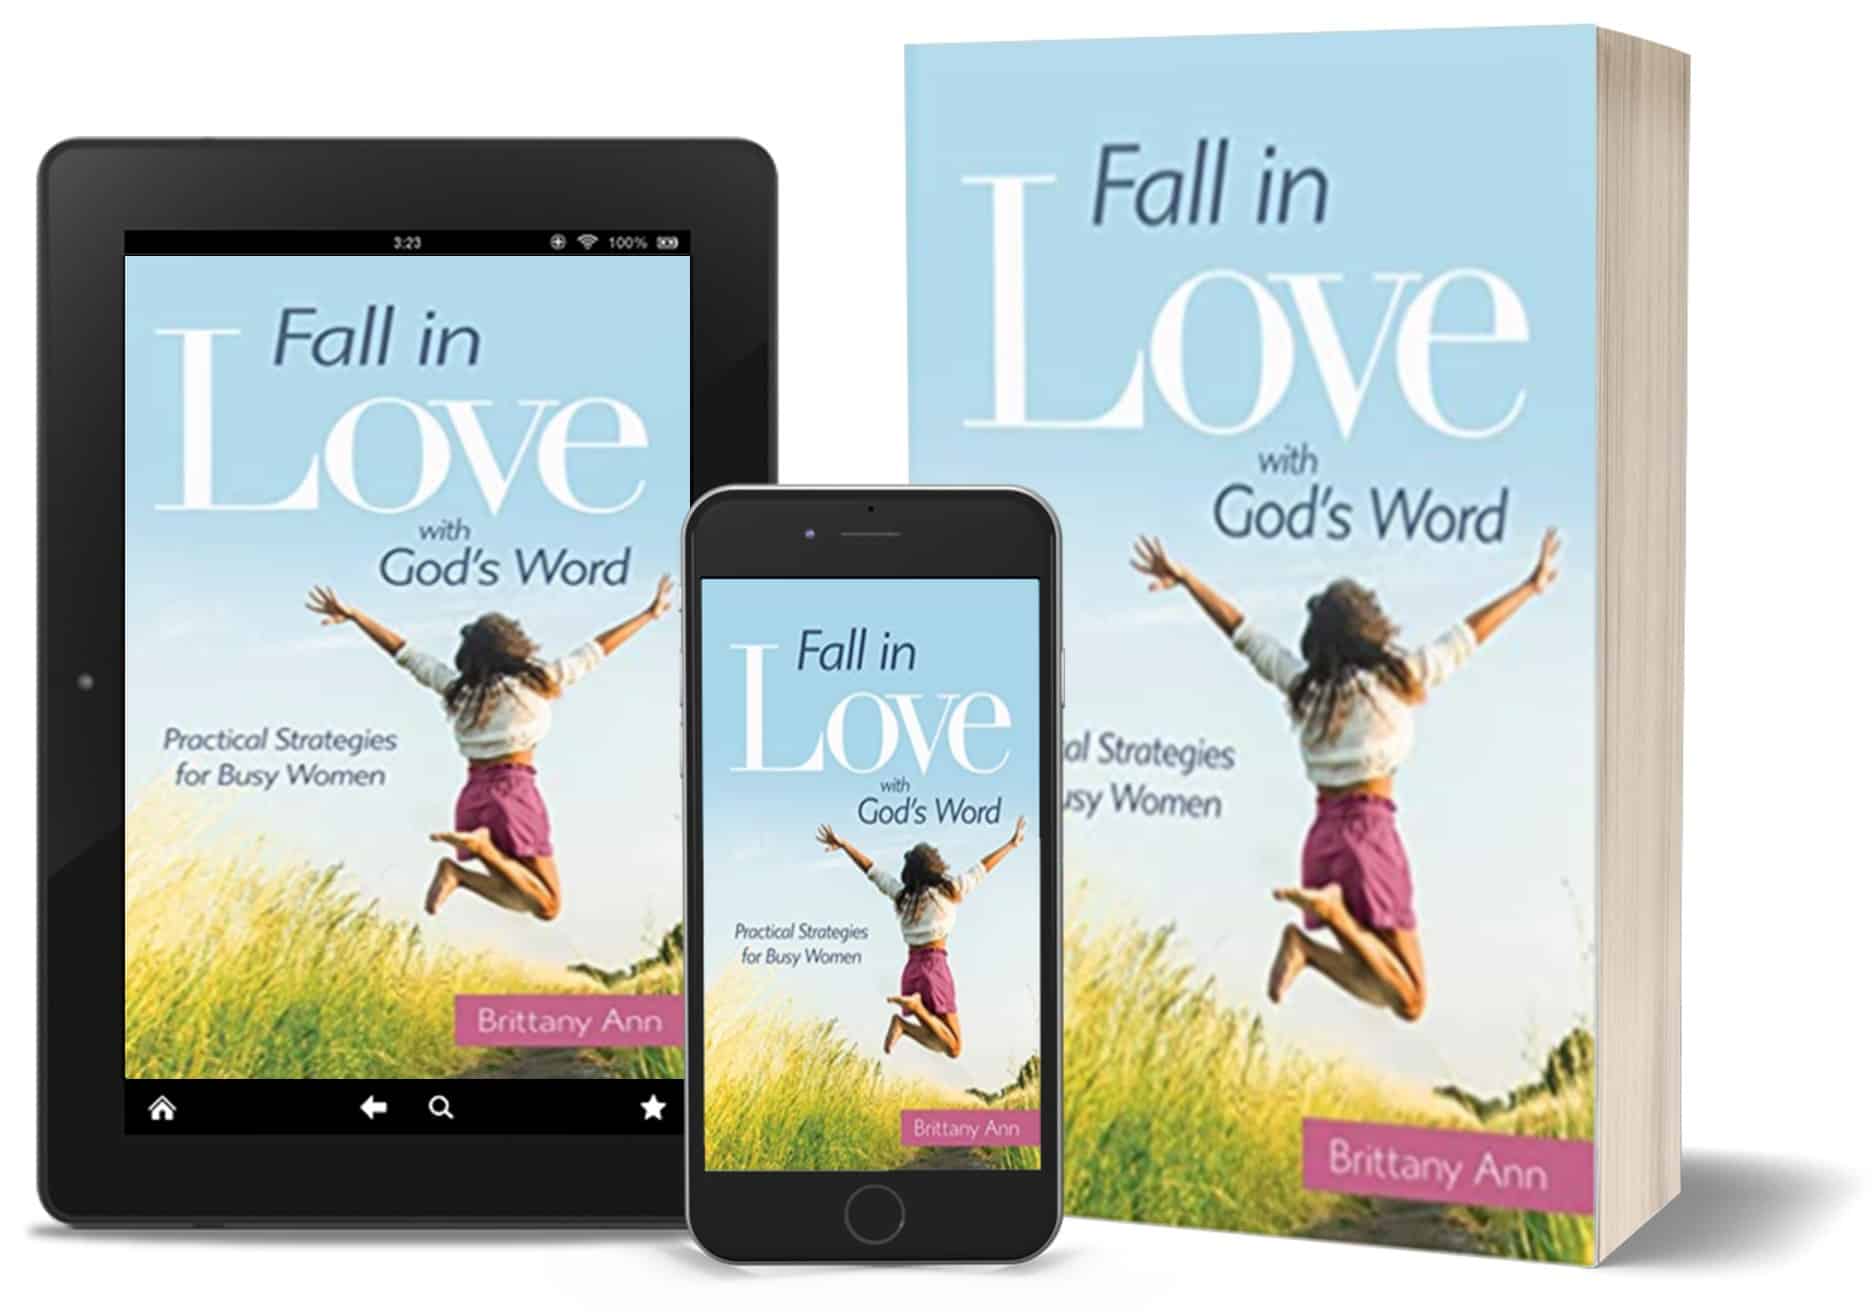 Fall in Love with God's Word on tablet, phone and hard copy of book